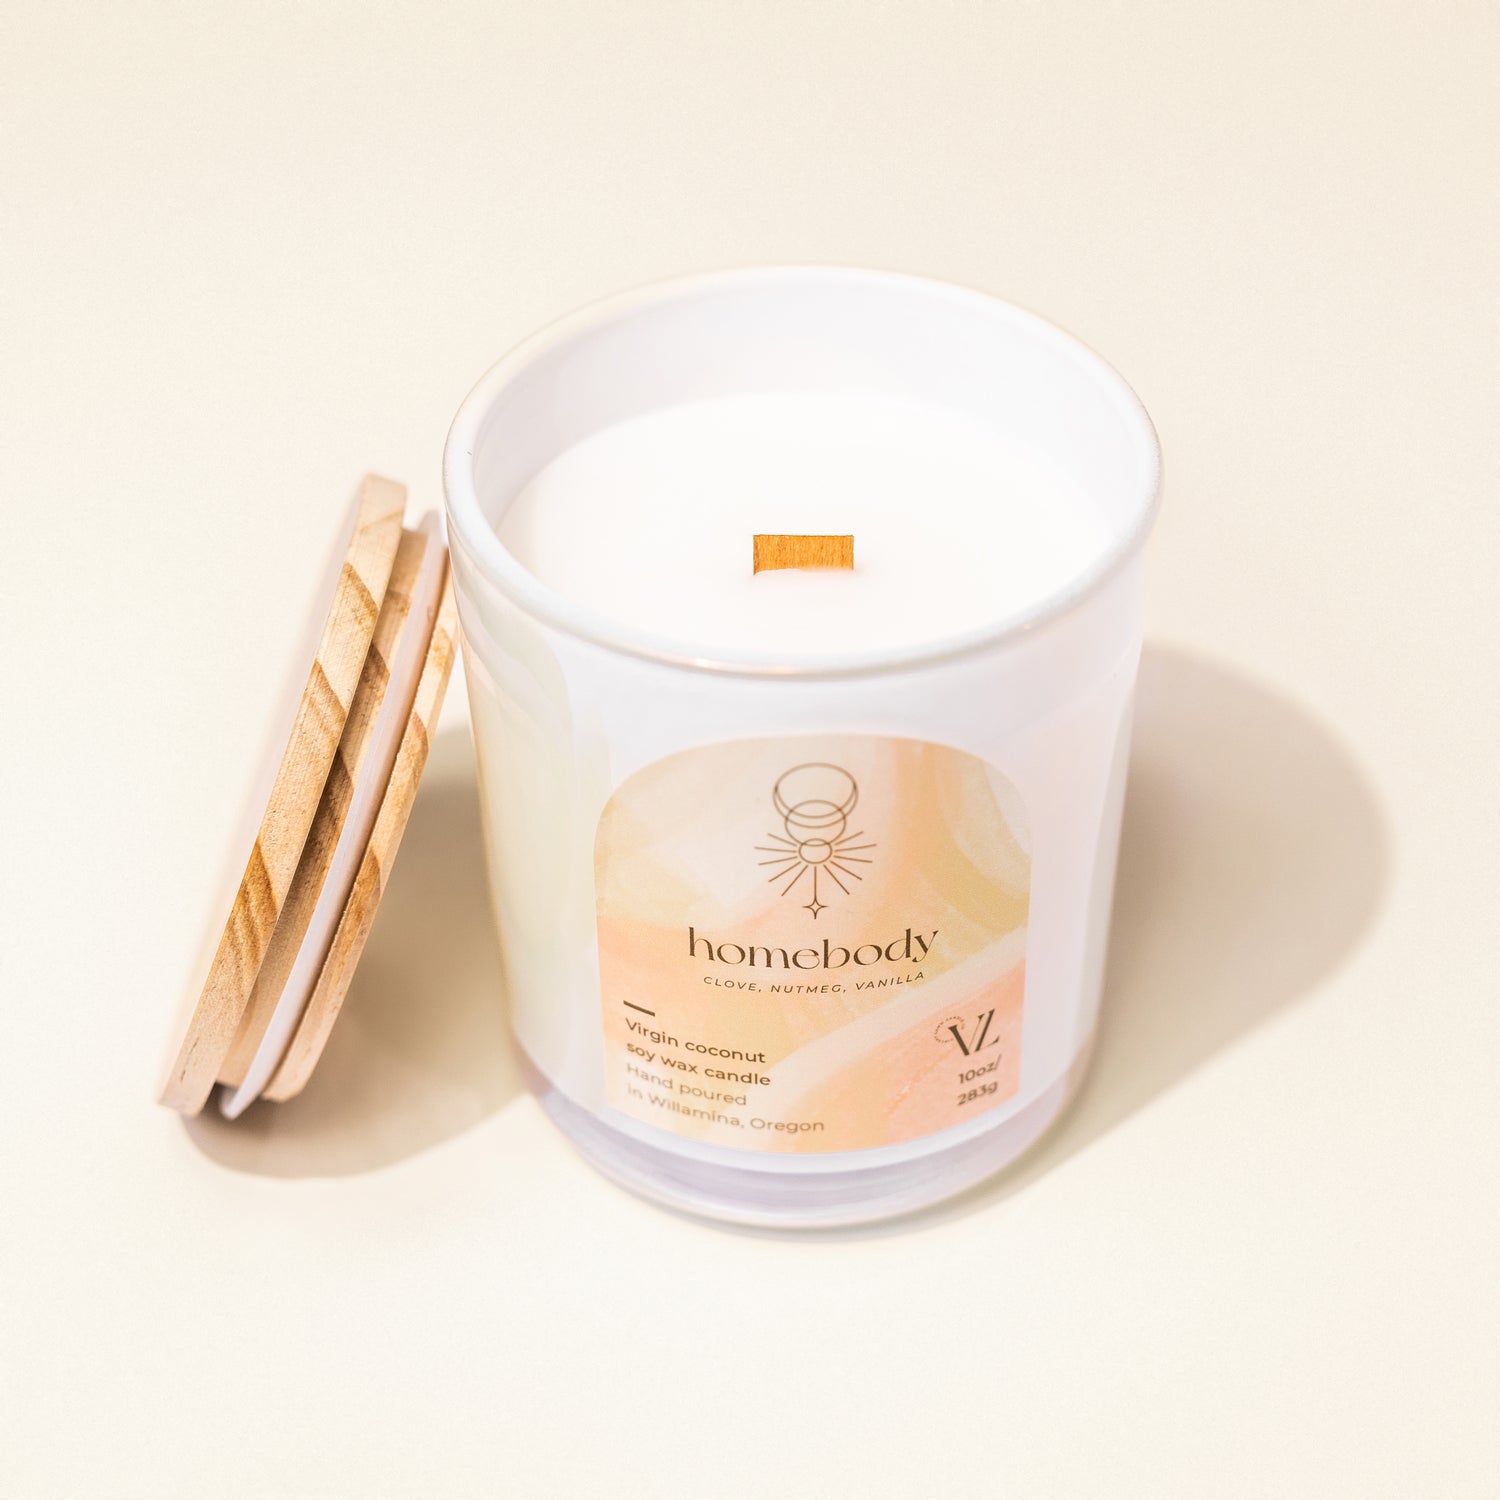 Homebody coconut soy wax candle I Clove, nutmeg, vanilla - Vincent Land Candle Co.